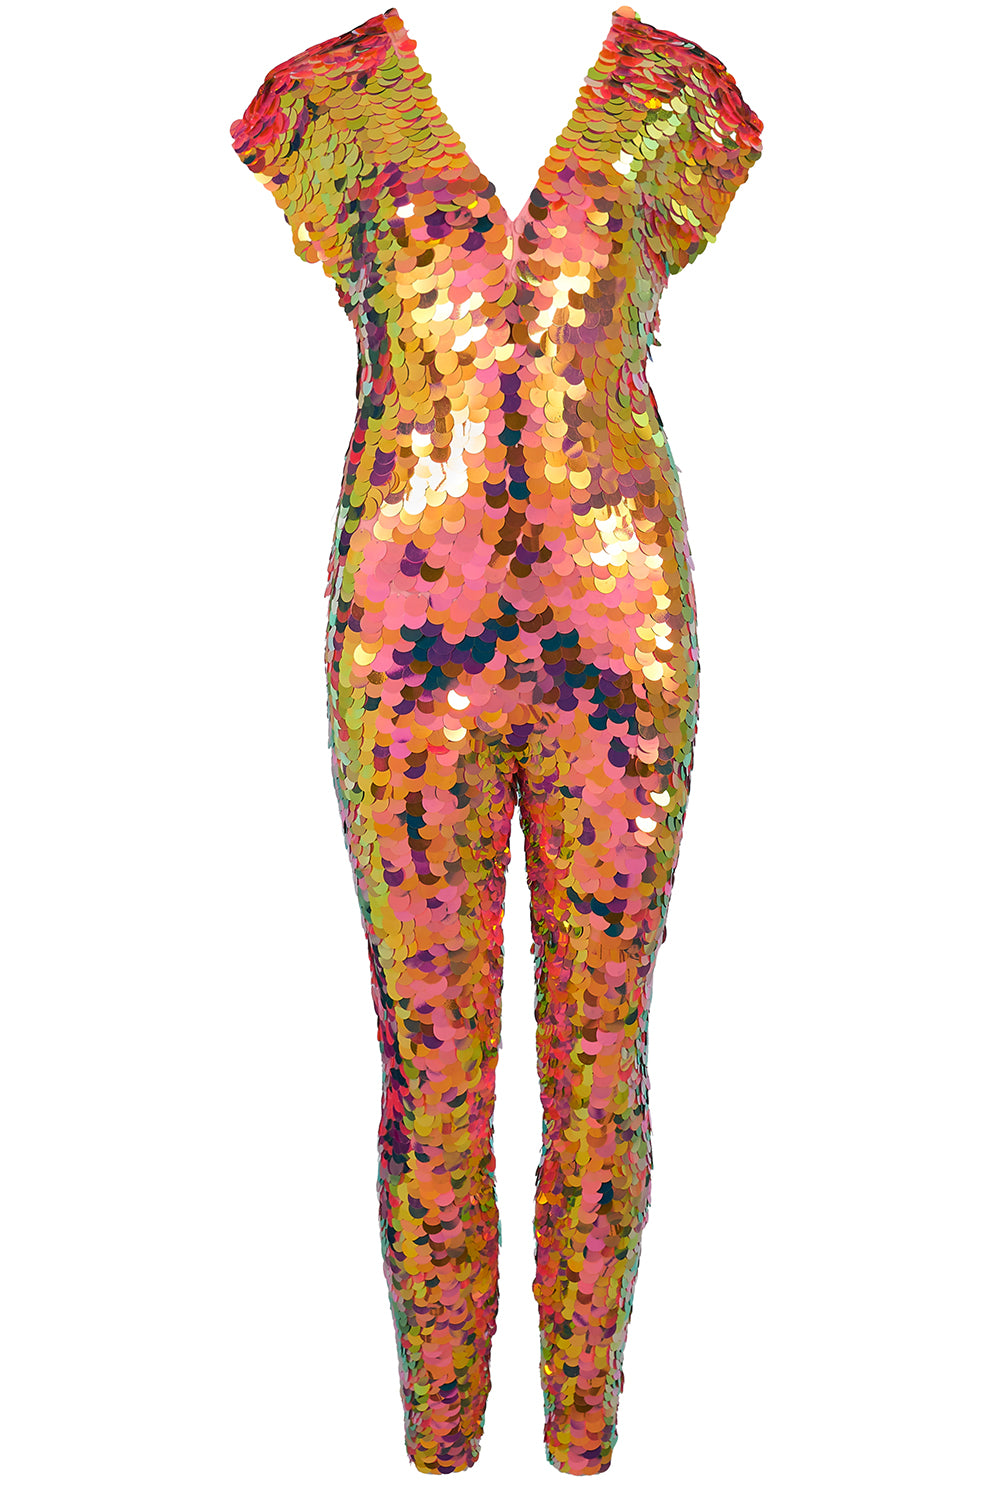 Jumpsuit covered in large pink and orange sequins